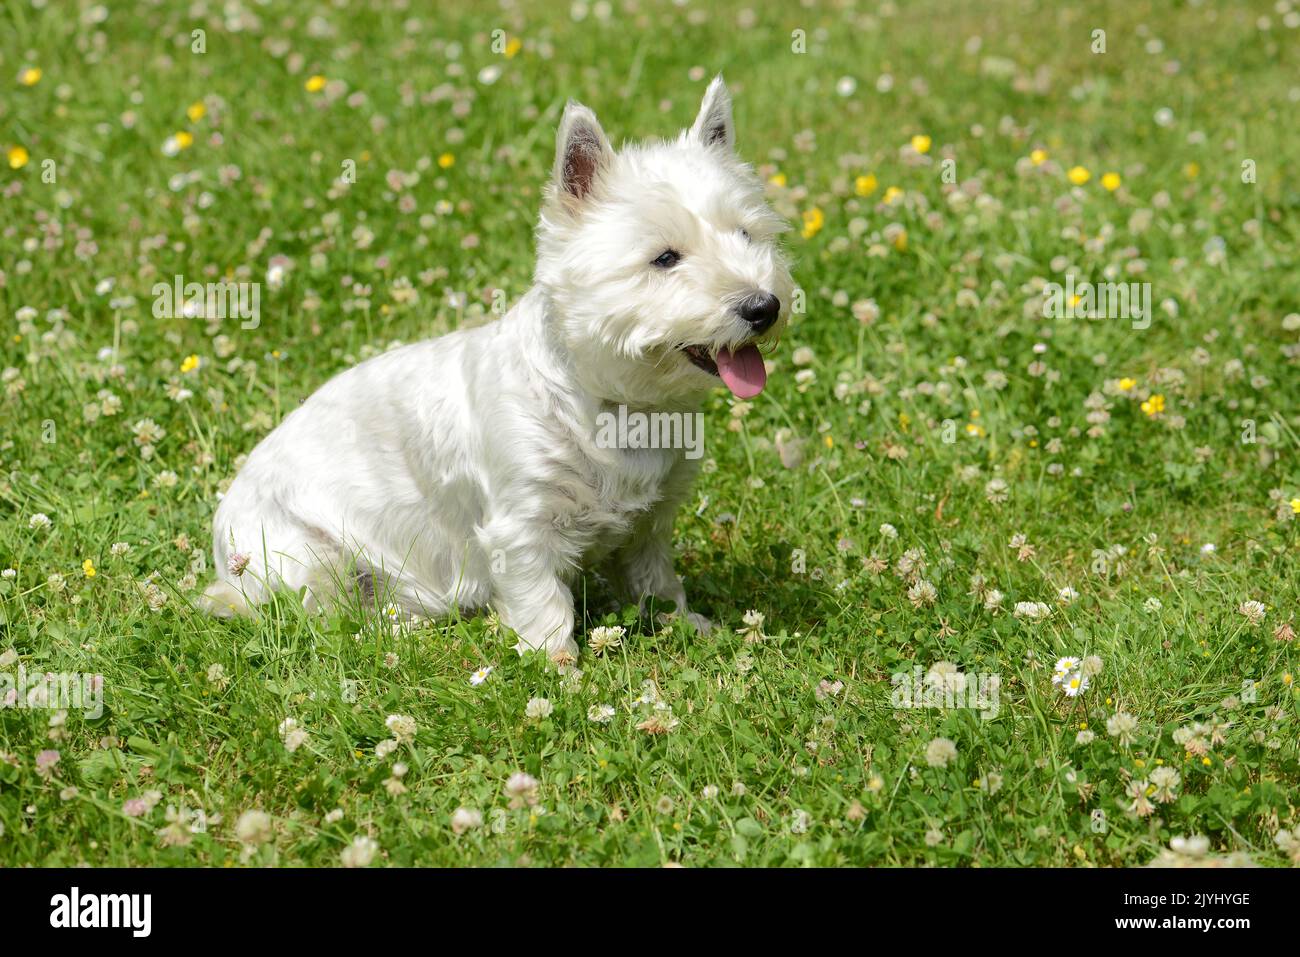 Yorkshire Terrier (Canis lupus f. familiaris), kleines weißes Weibchen Yorkshire Terrier auf einer Wiese Stockfoto